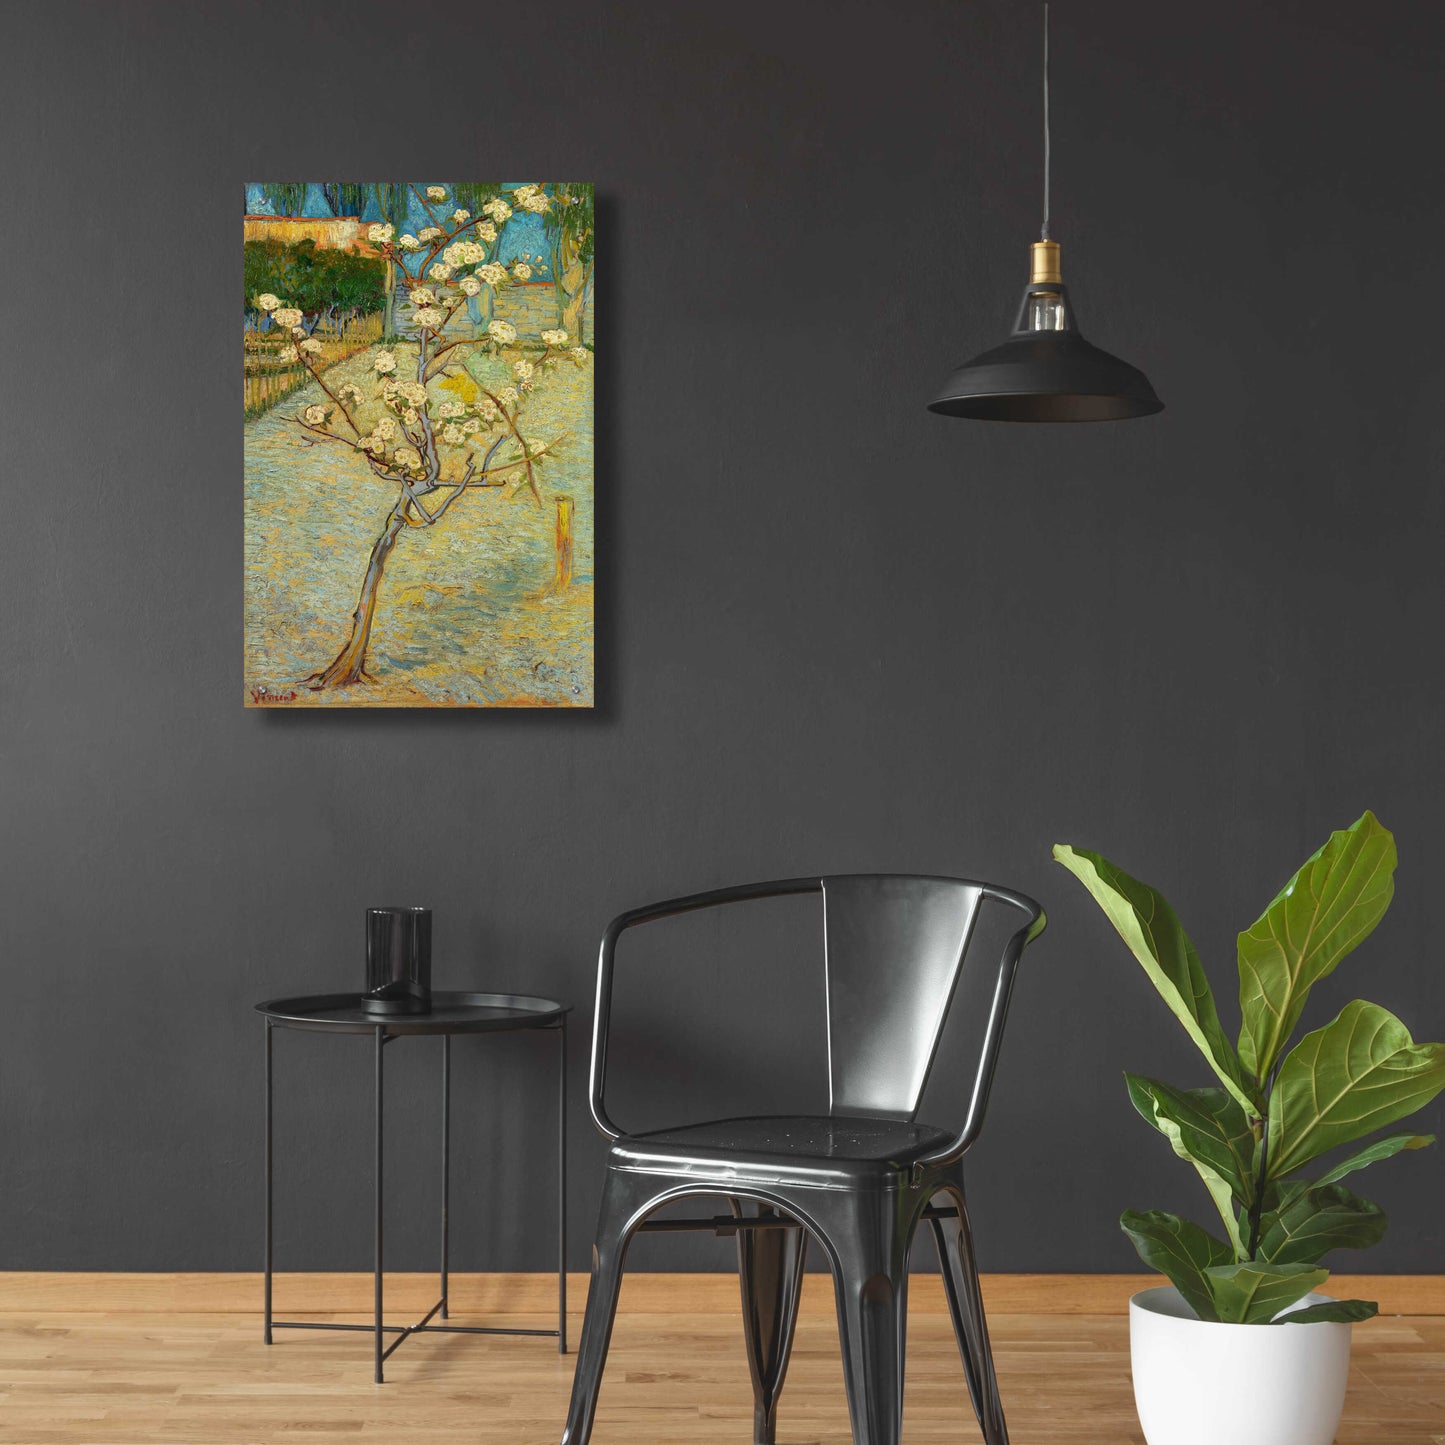 Epic Art 'Small Pear Tree In Blossom' by Vincent Van Gogh, Acrylic Glass Wall Art,24x36